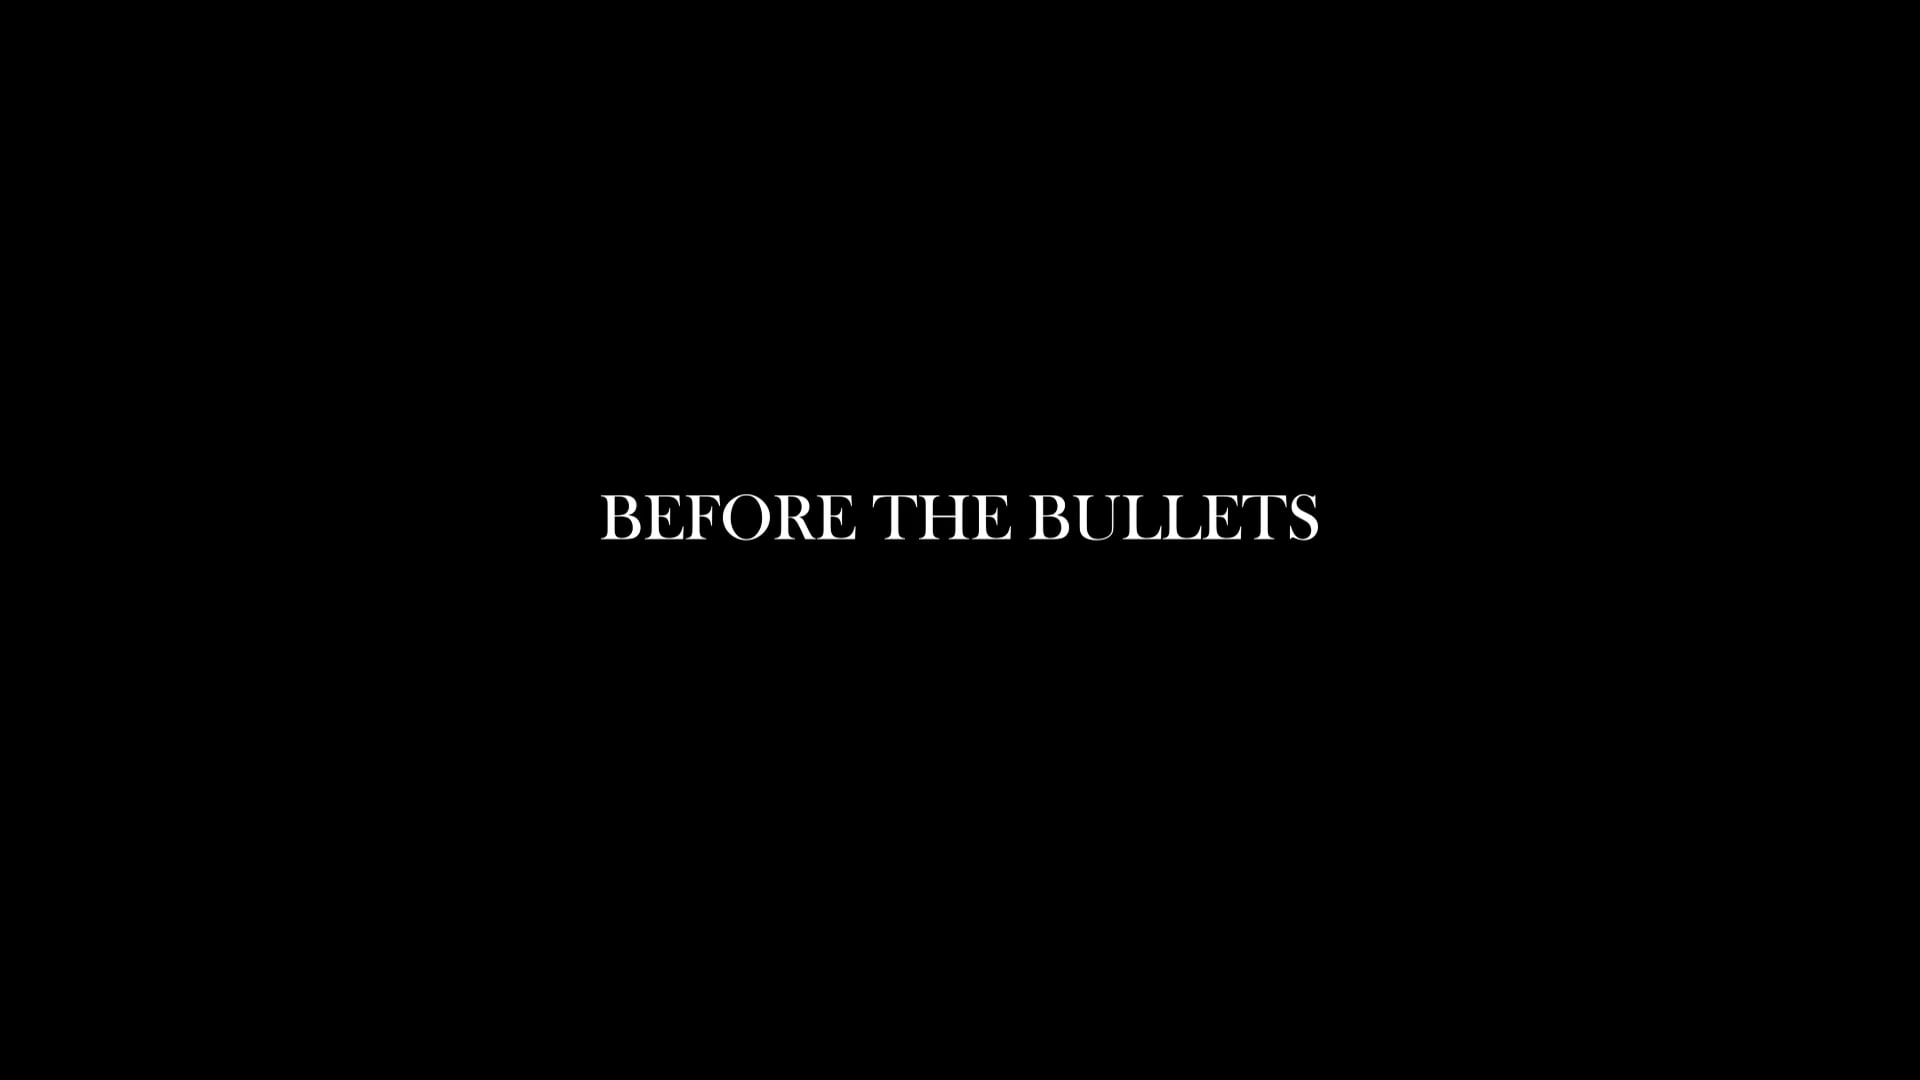 Thumbnail image for video with title "Before the Bullets"